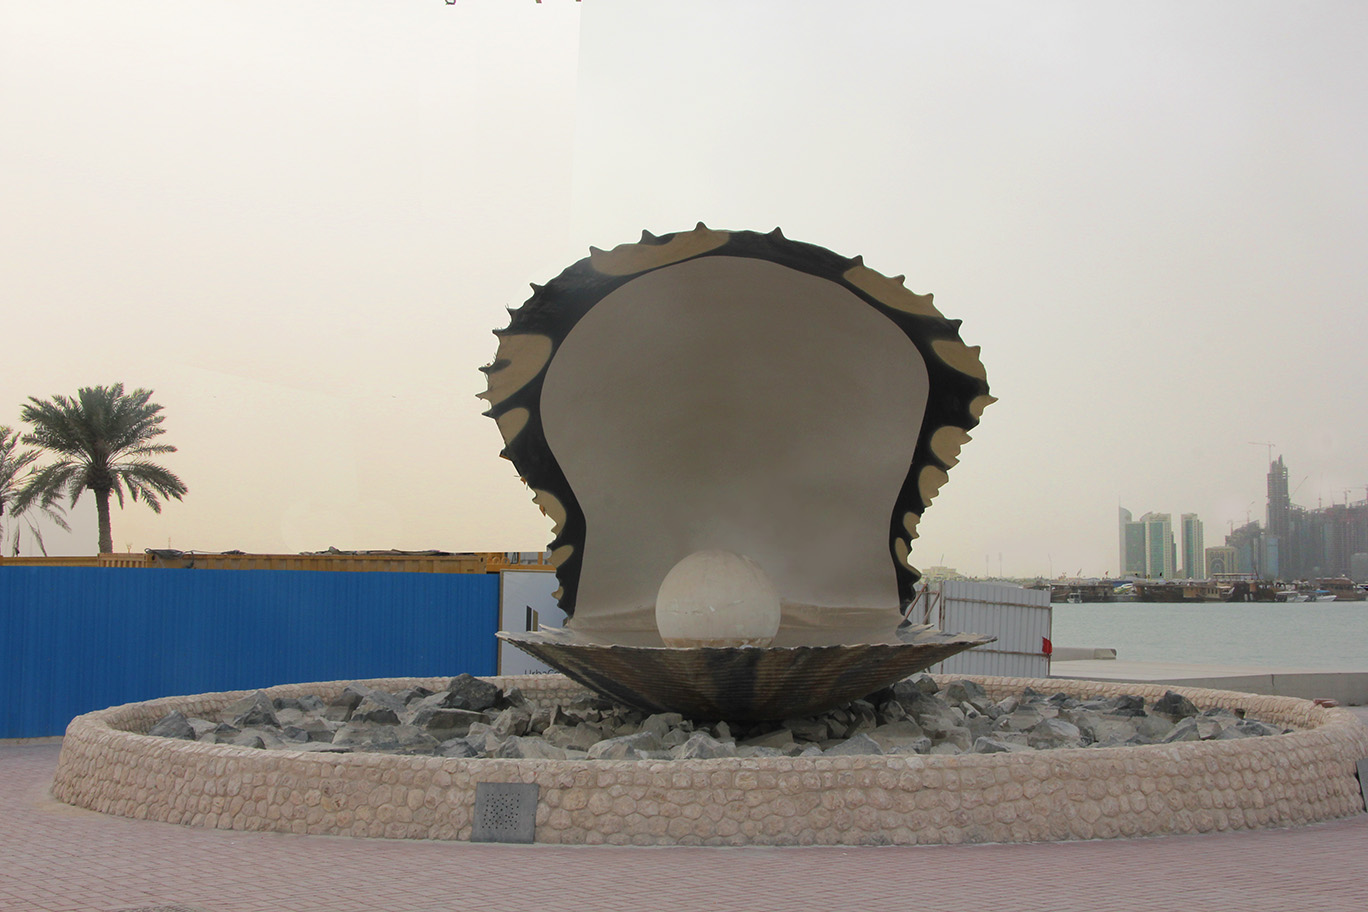 Close to the Museum of Islamic Art, is this fountain in the form of an oyster with a pearl.